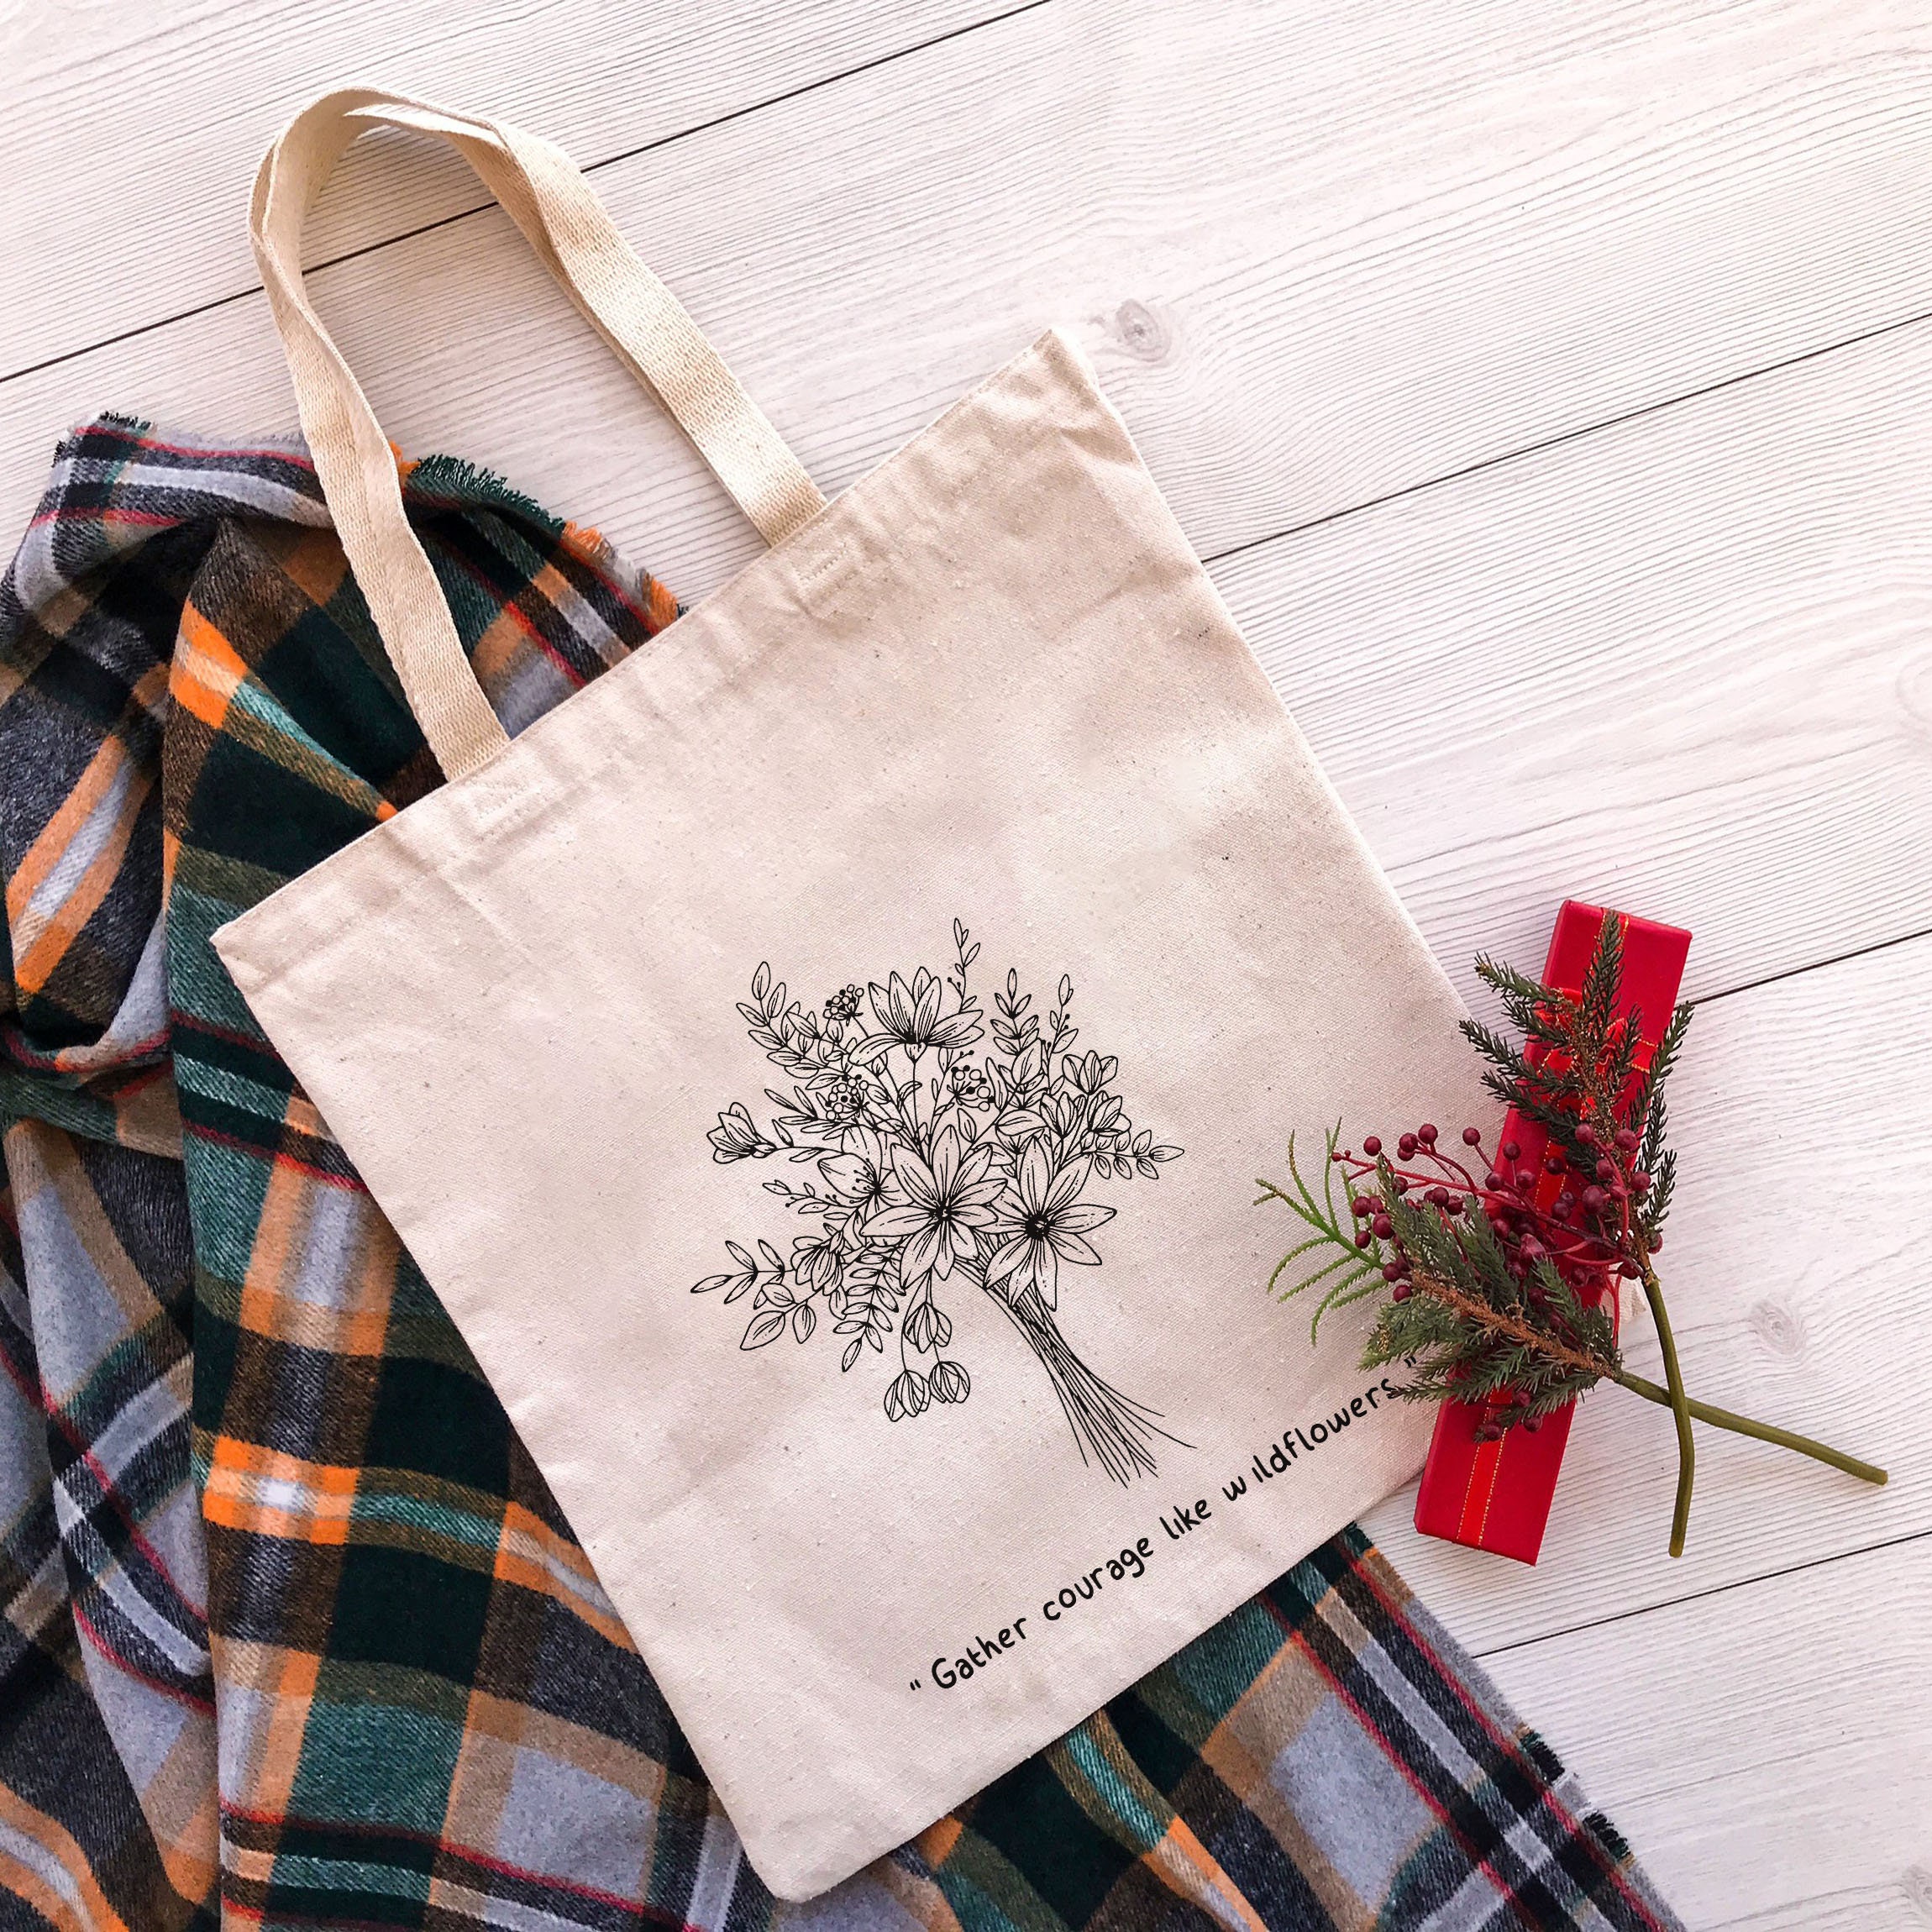 Wildflower Bouquet Tote Bag